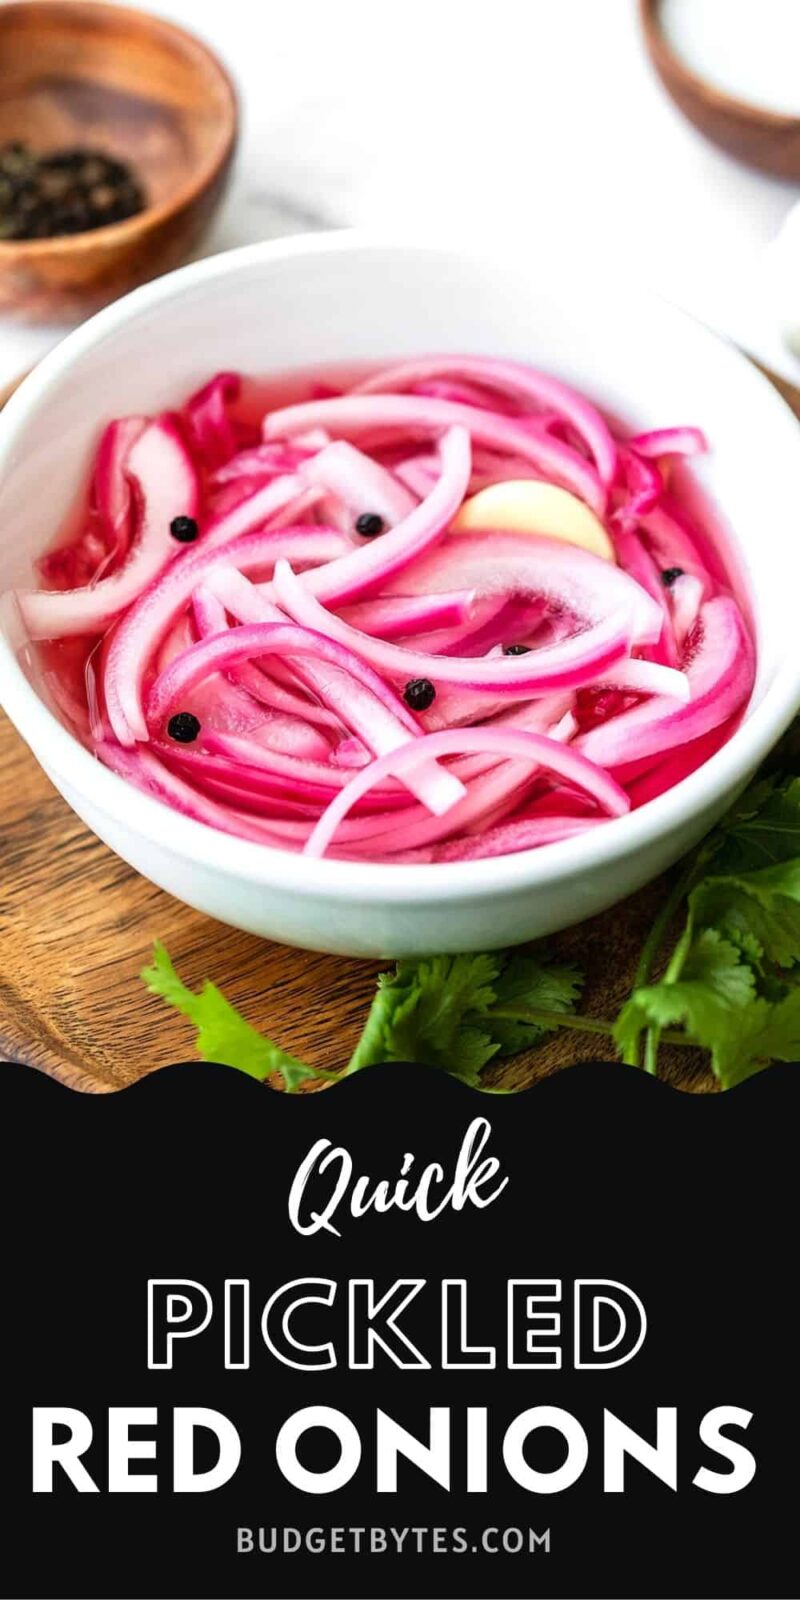 Side view of a bowl of pickled red onions, title text at the bottom